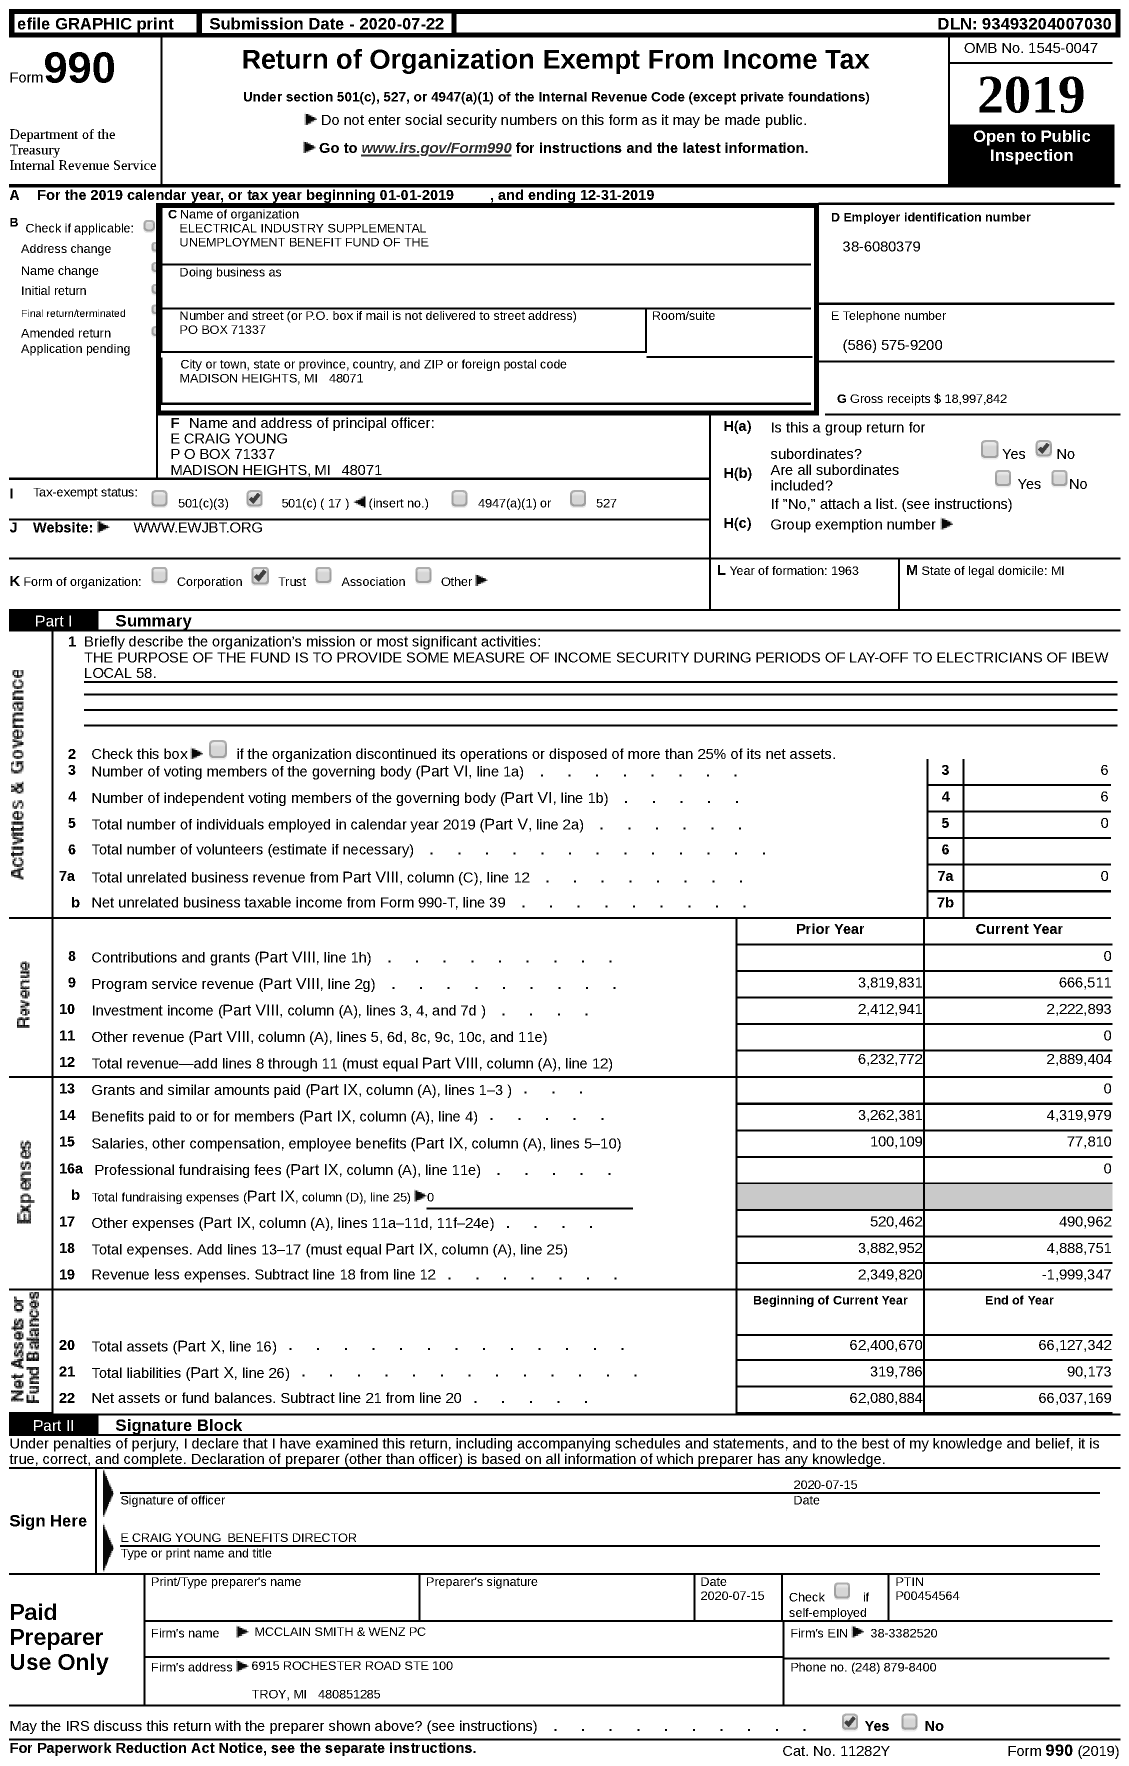 Image of first page of 2019 Form 990 for Electrical Industry Supplemental Unemployment Benefit Fund